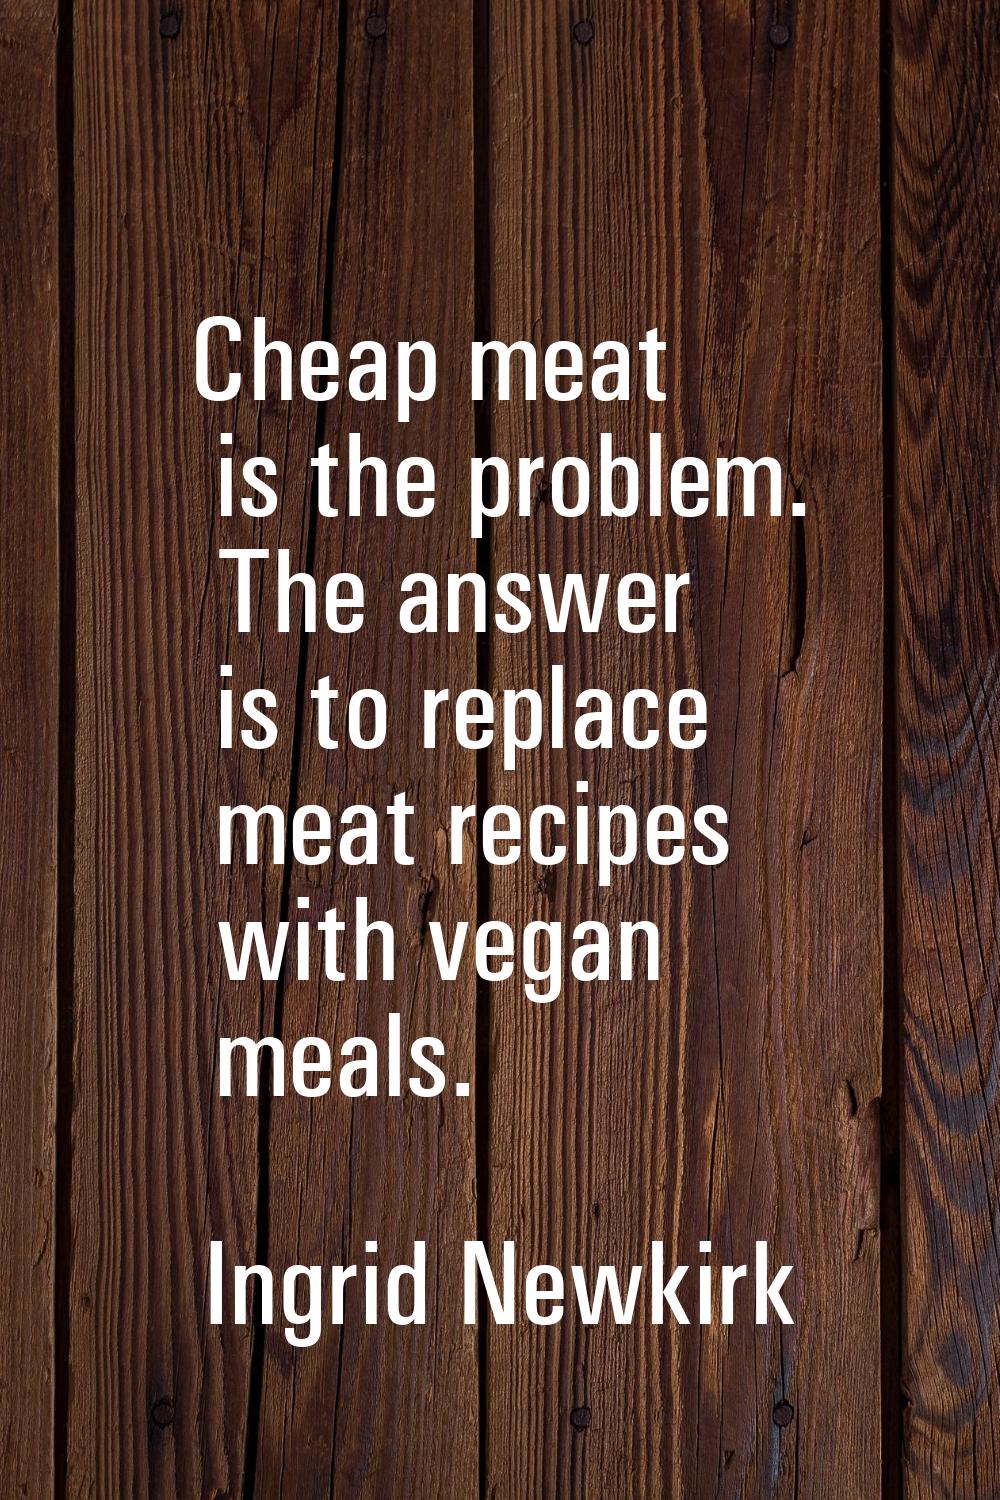 Cheap meat is the problem. The answer is to replace meat recipes with vegan meals.